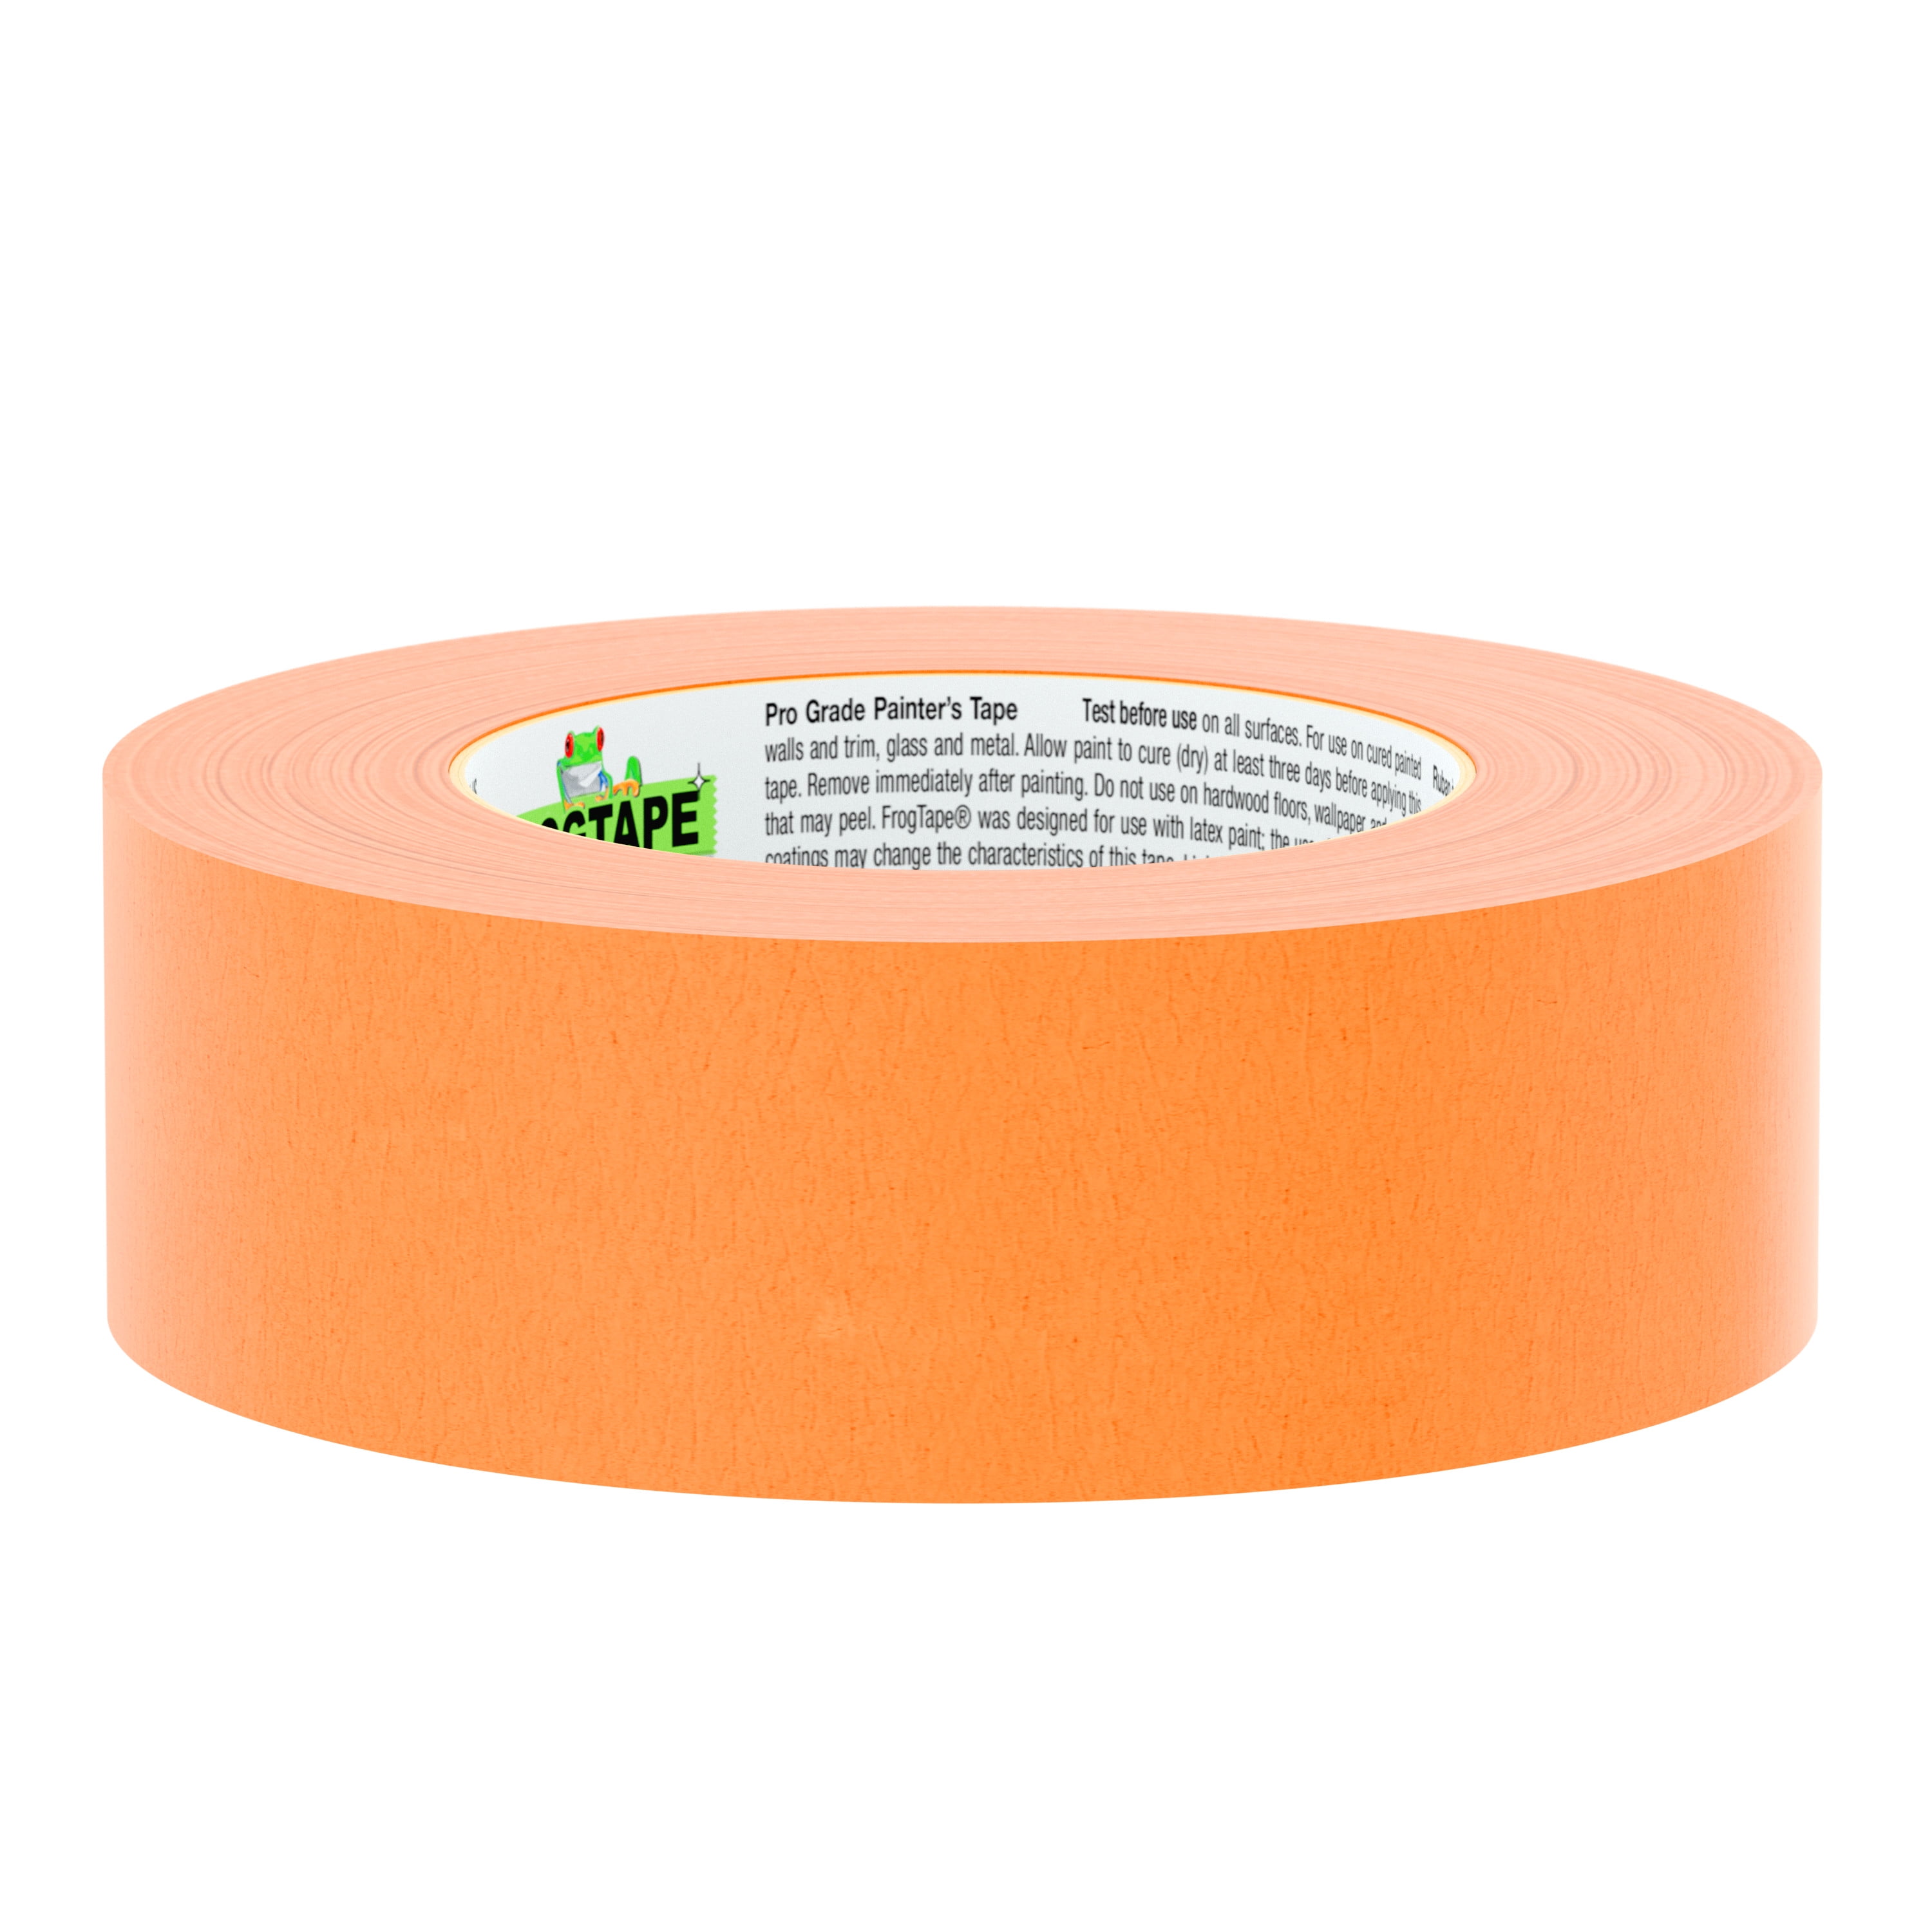 10 Best Painters Tape Reviews - Top Tape for Painting